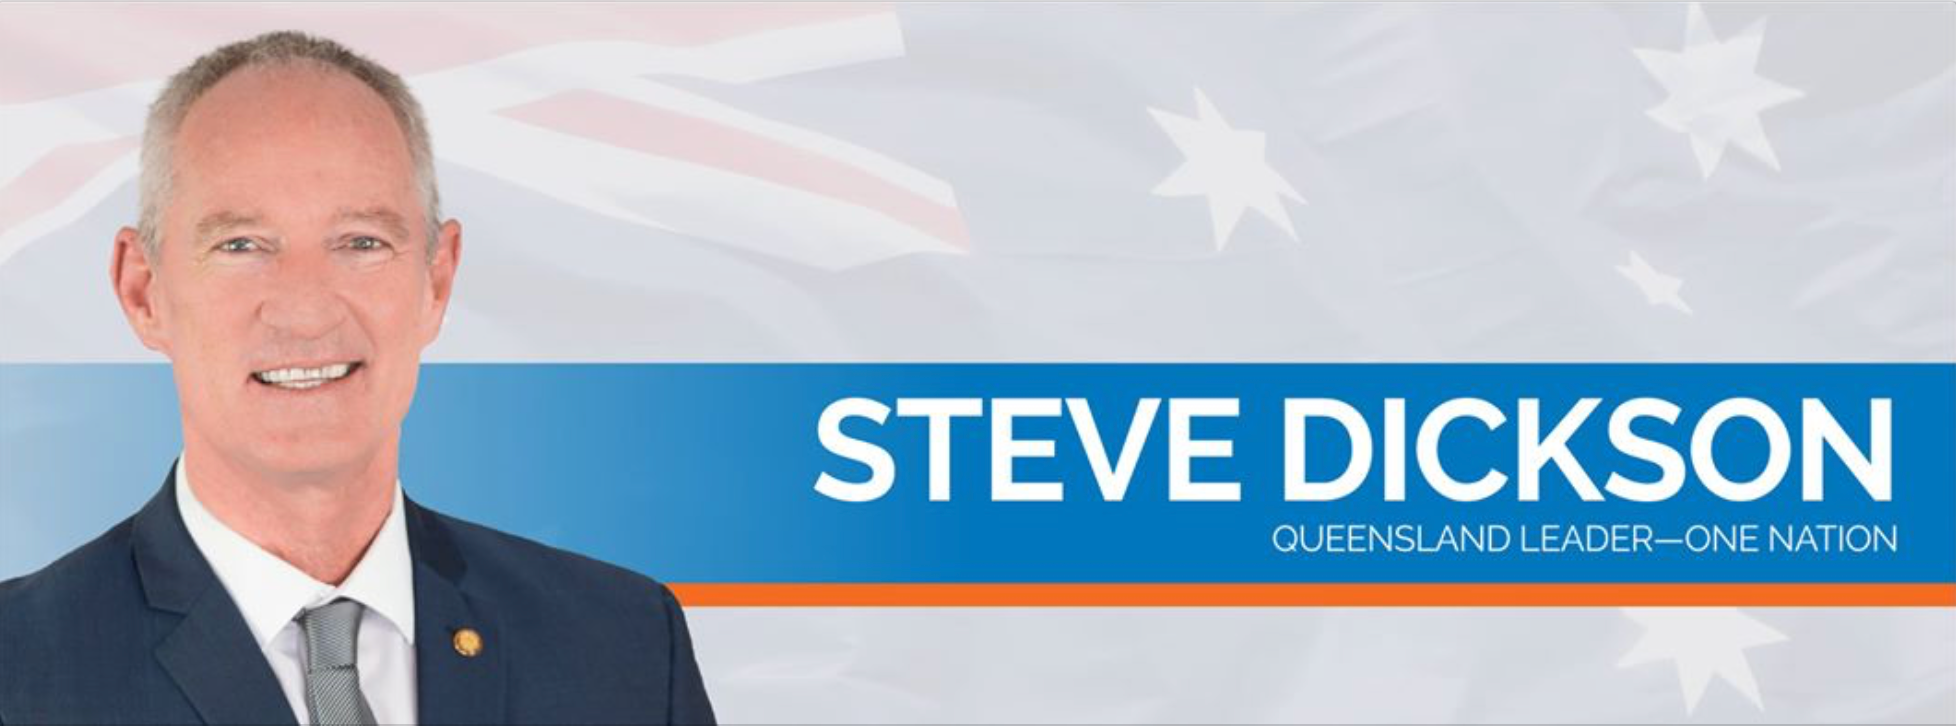 Steve Dickson hits the streets to discuss 'Gender Neutral' language at this years Commonwealth Games on the Gold Coast